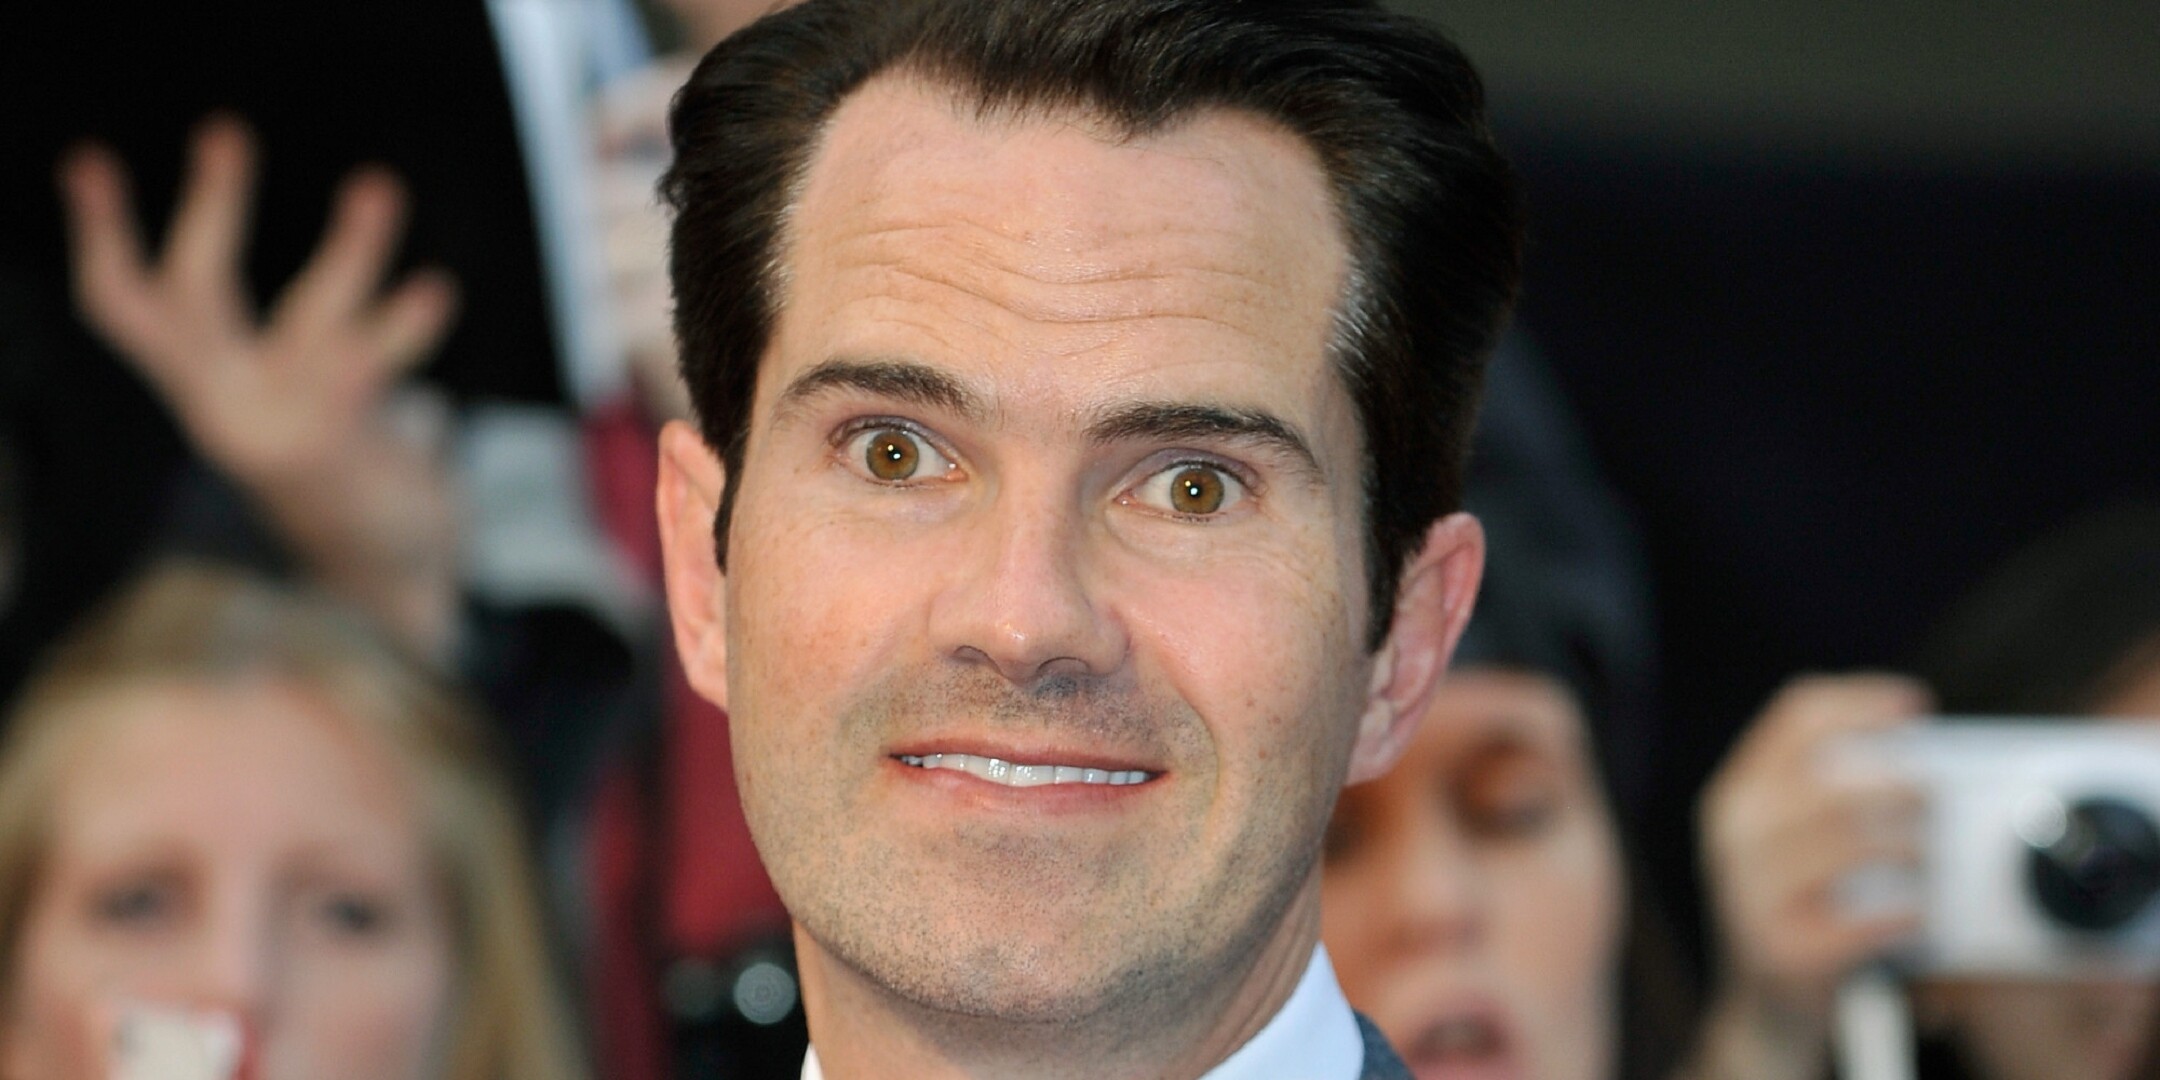 Jimmy Carr: The British comedian with his own particular brand of comedy, A controversial stand-up artist. 2160x1080 Dual Screen Background.